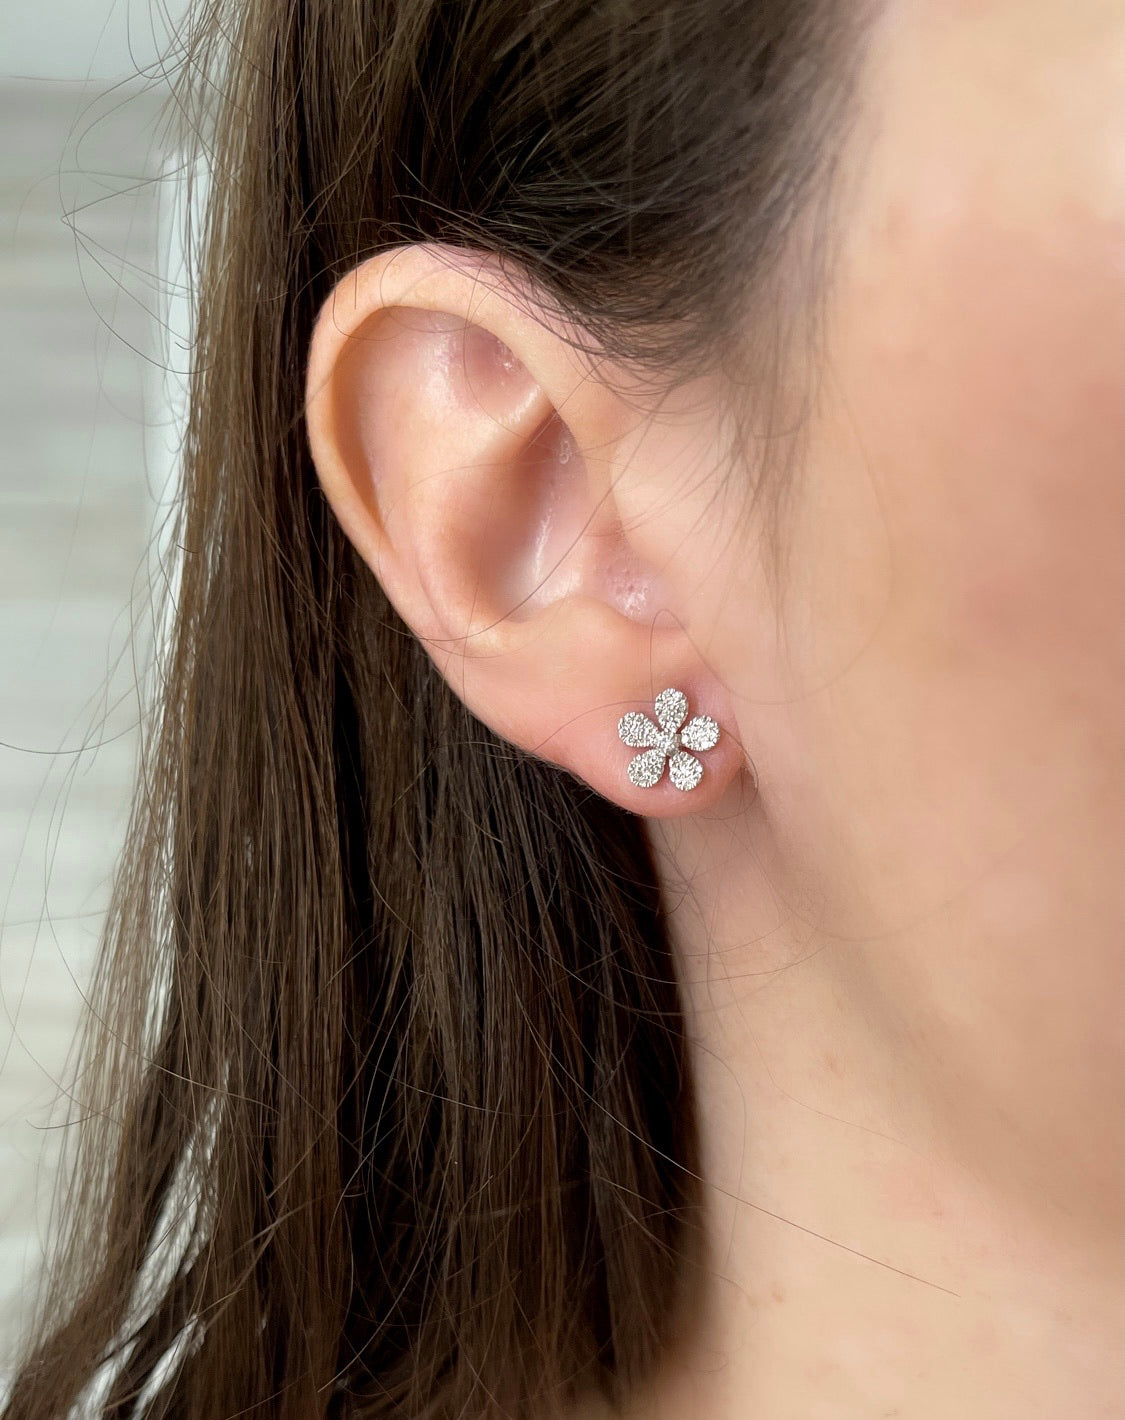 14K Gold Small Diamond Flower Stud Earrings 65956: buy online in NYC. Best  price at TRAXNYC.